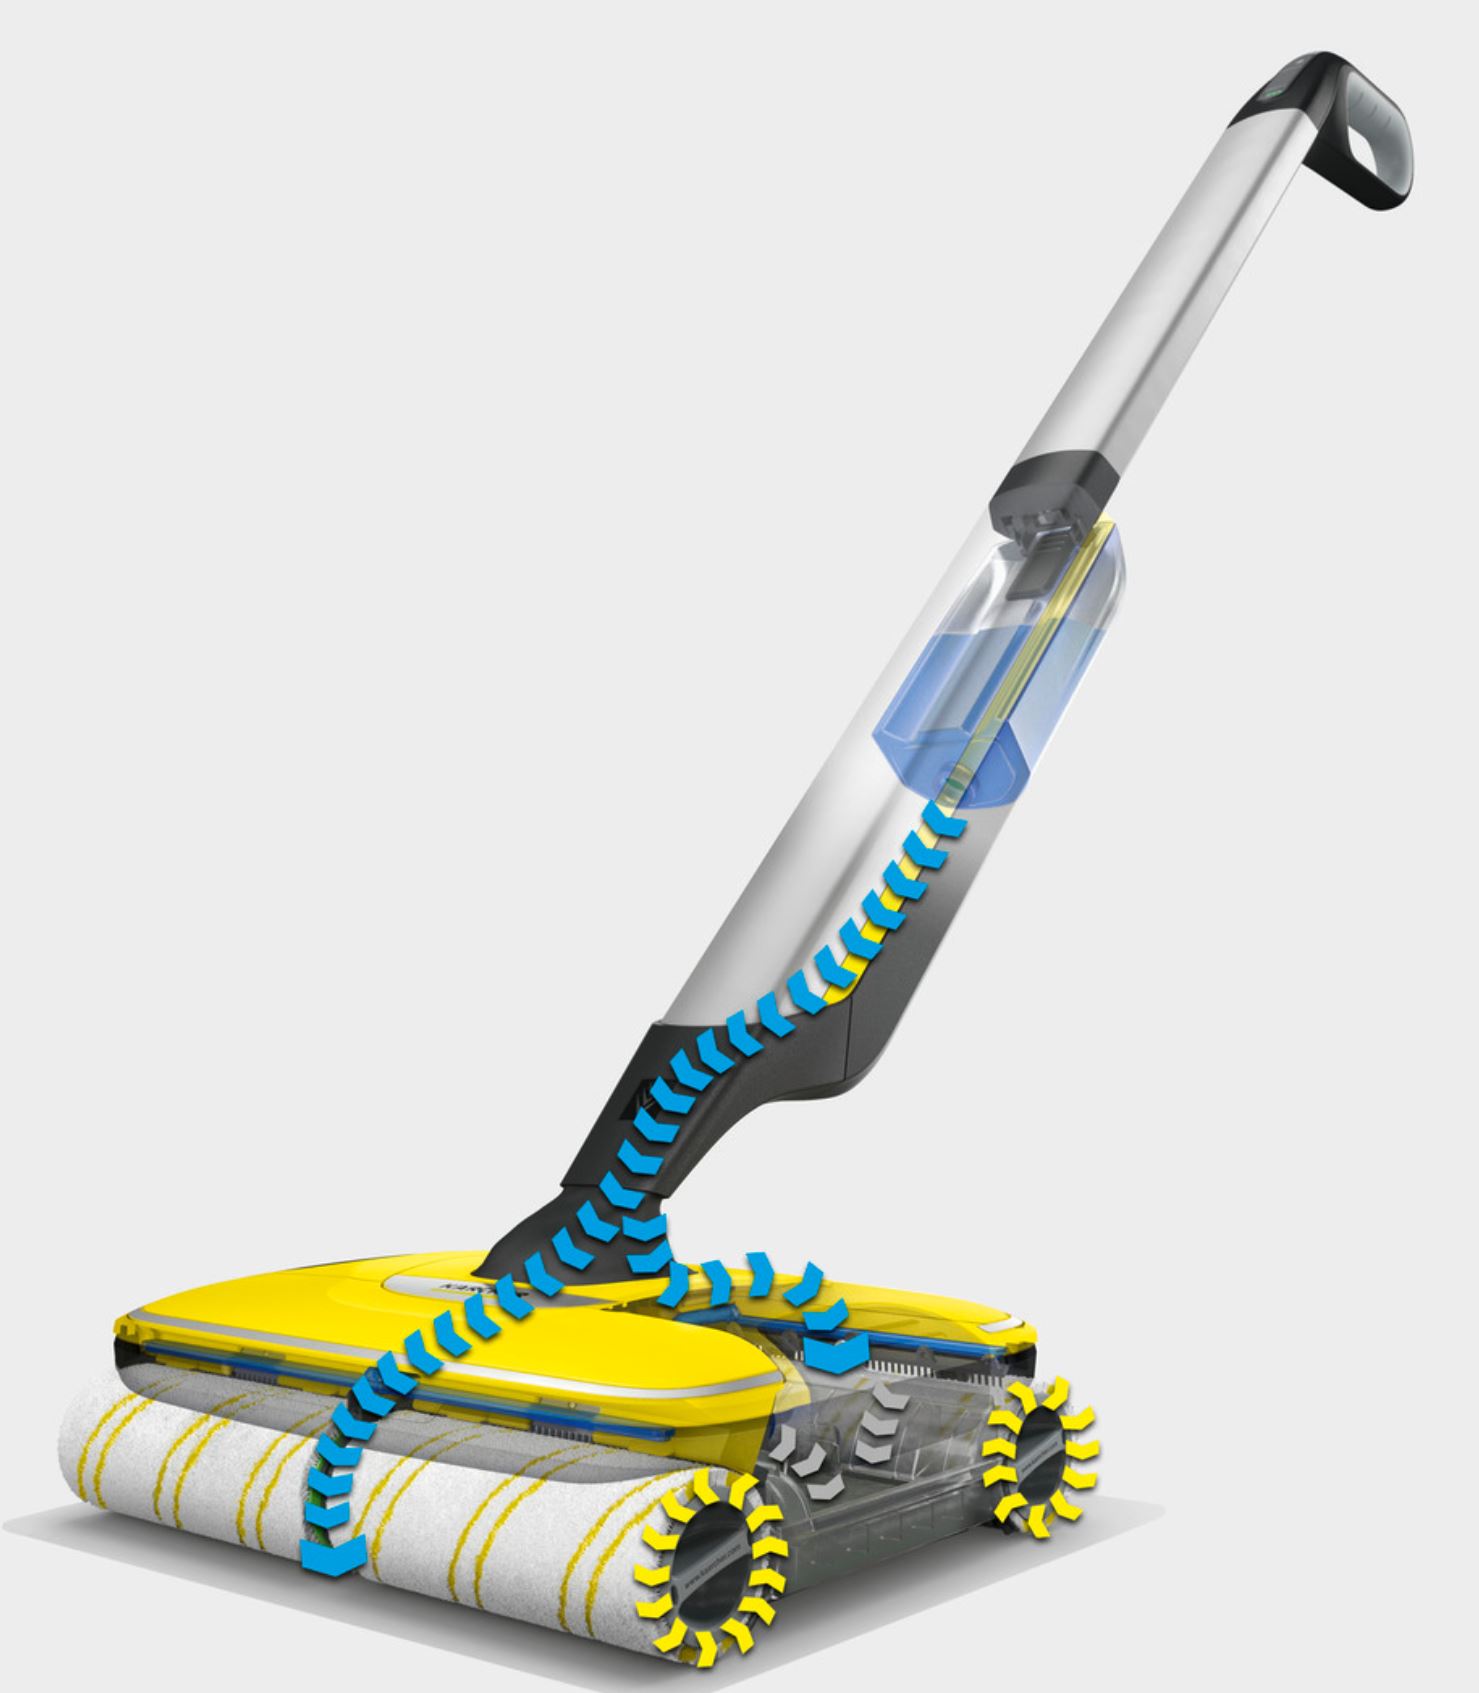 Kärcher FC 7 cordless power mop for a super effortless clean (cleaning .